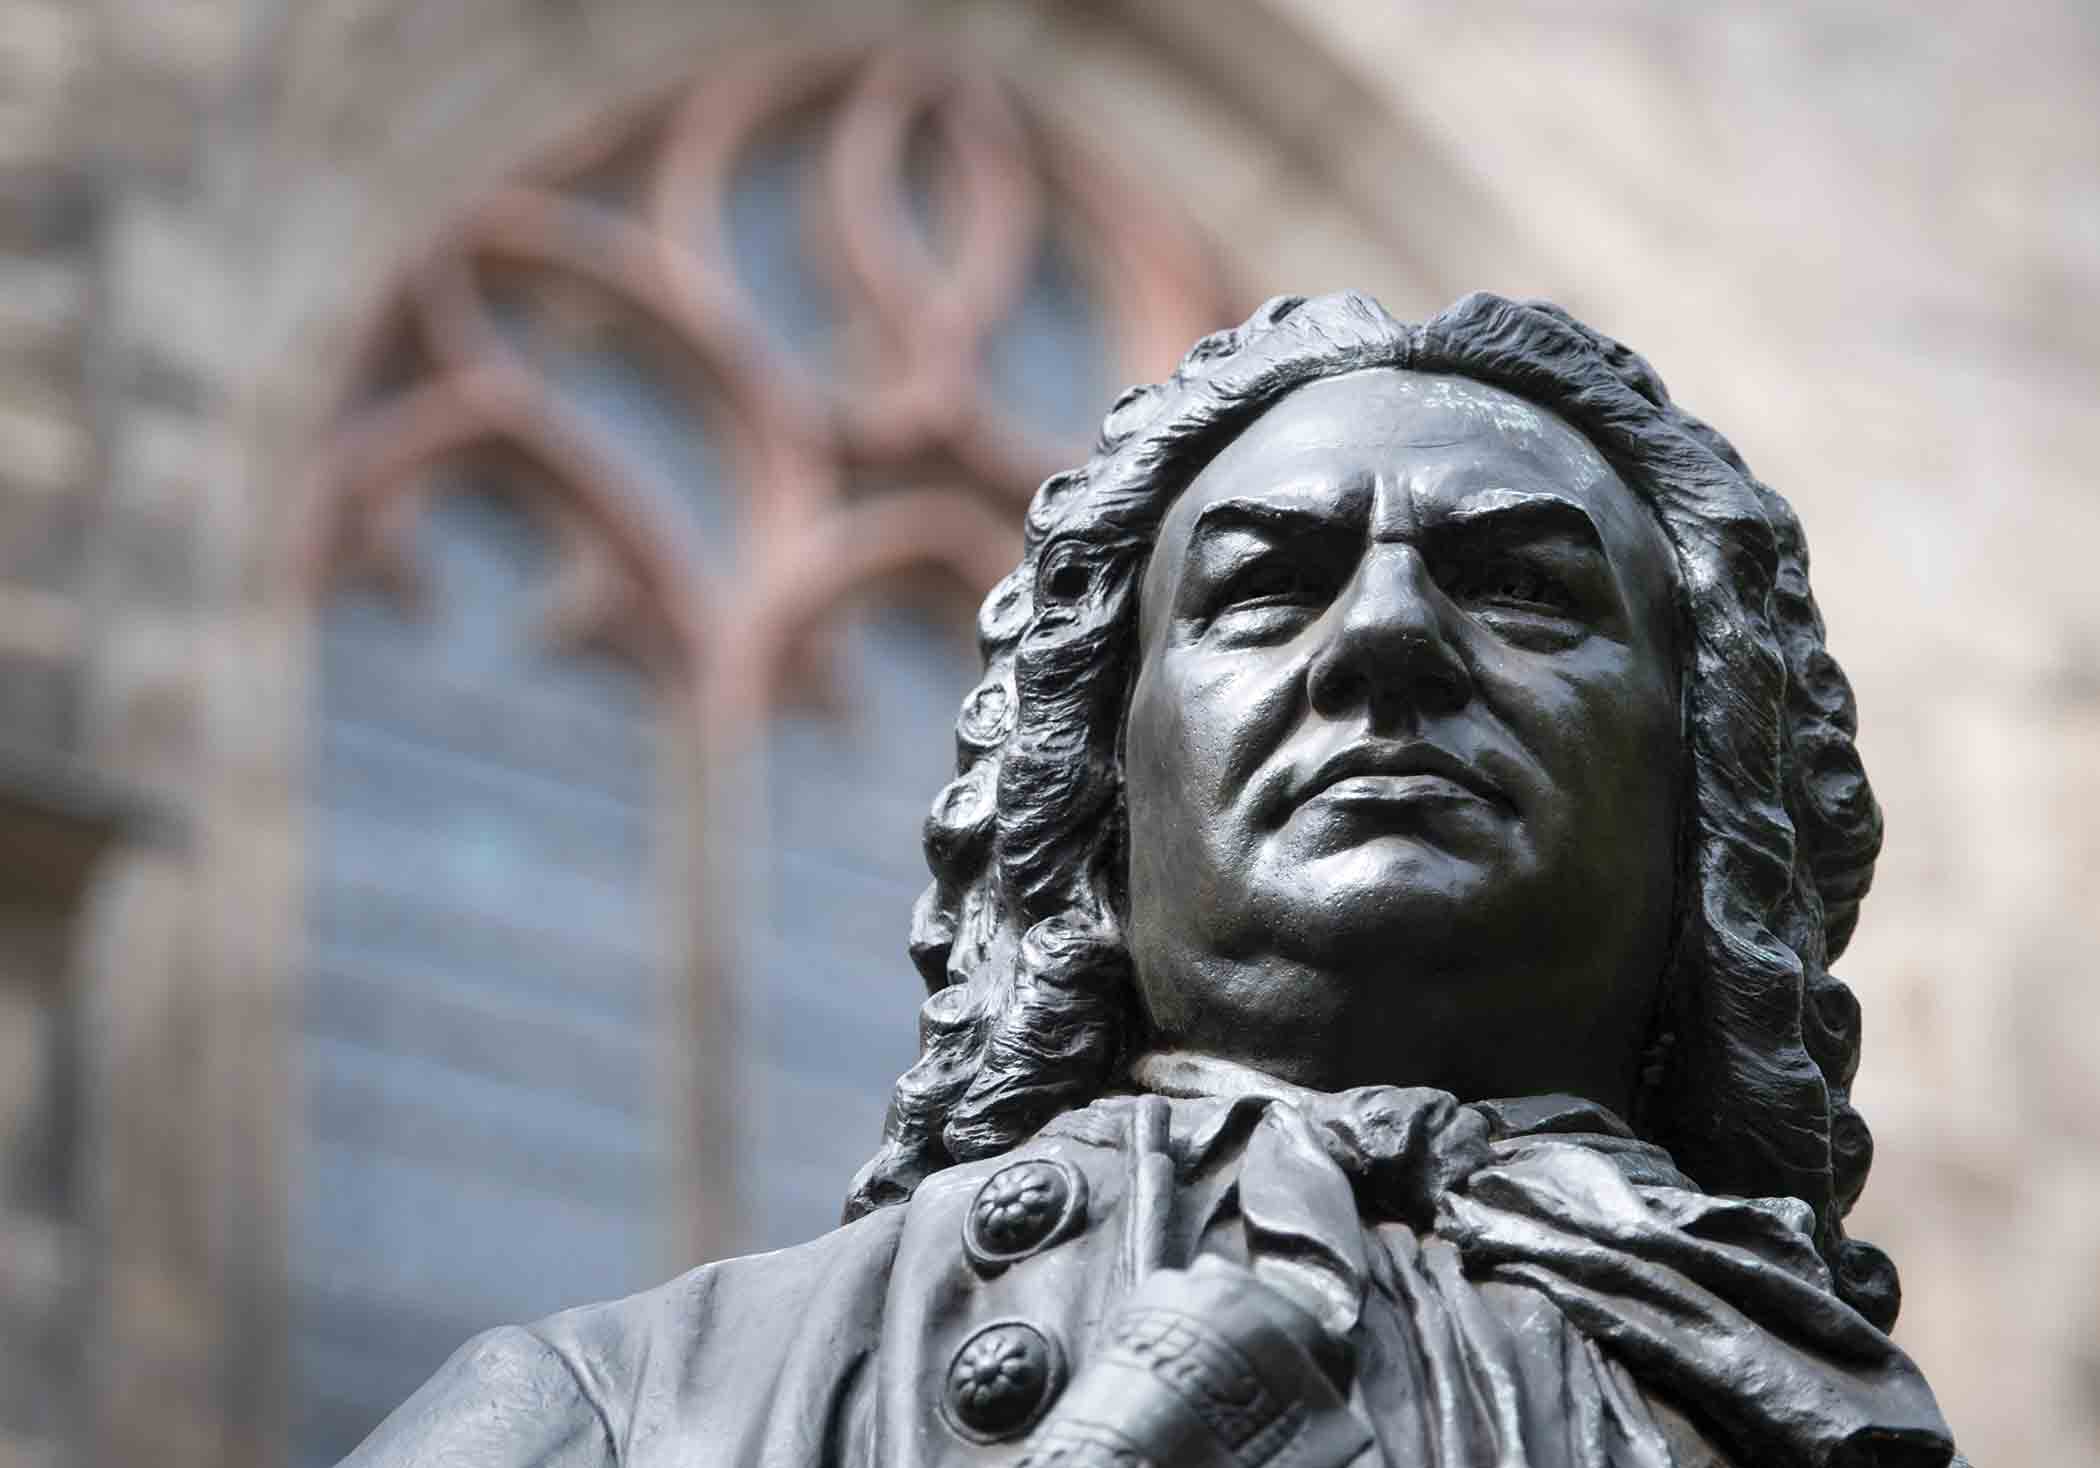 Bach loved puzzles so much he worked them into his music